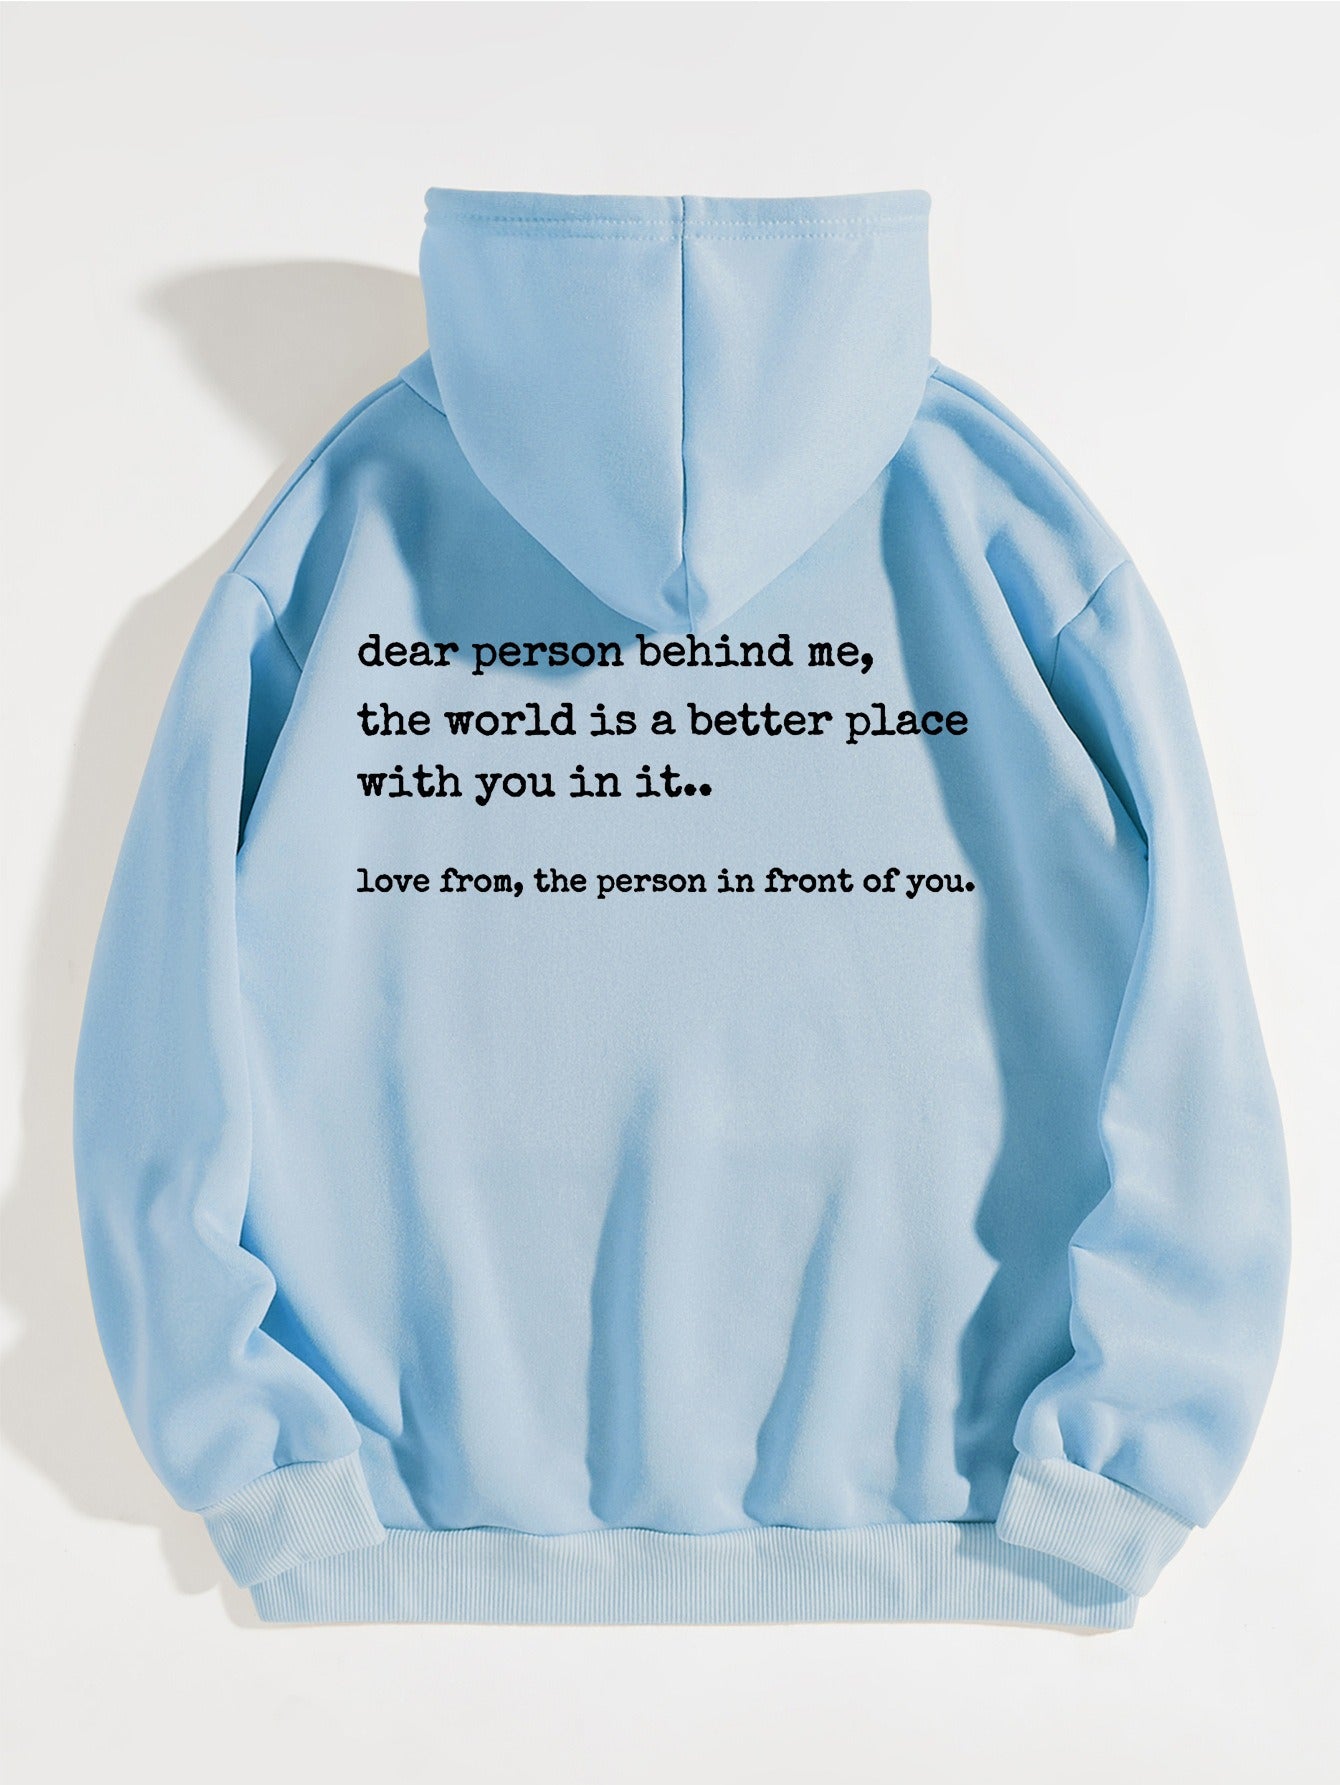 Dear person behind me hoodies and sweaters, mental health sportswear